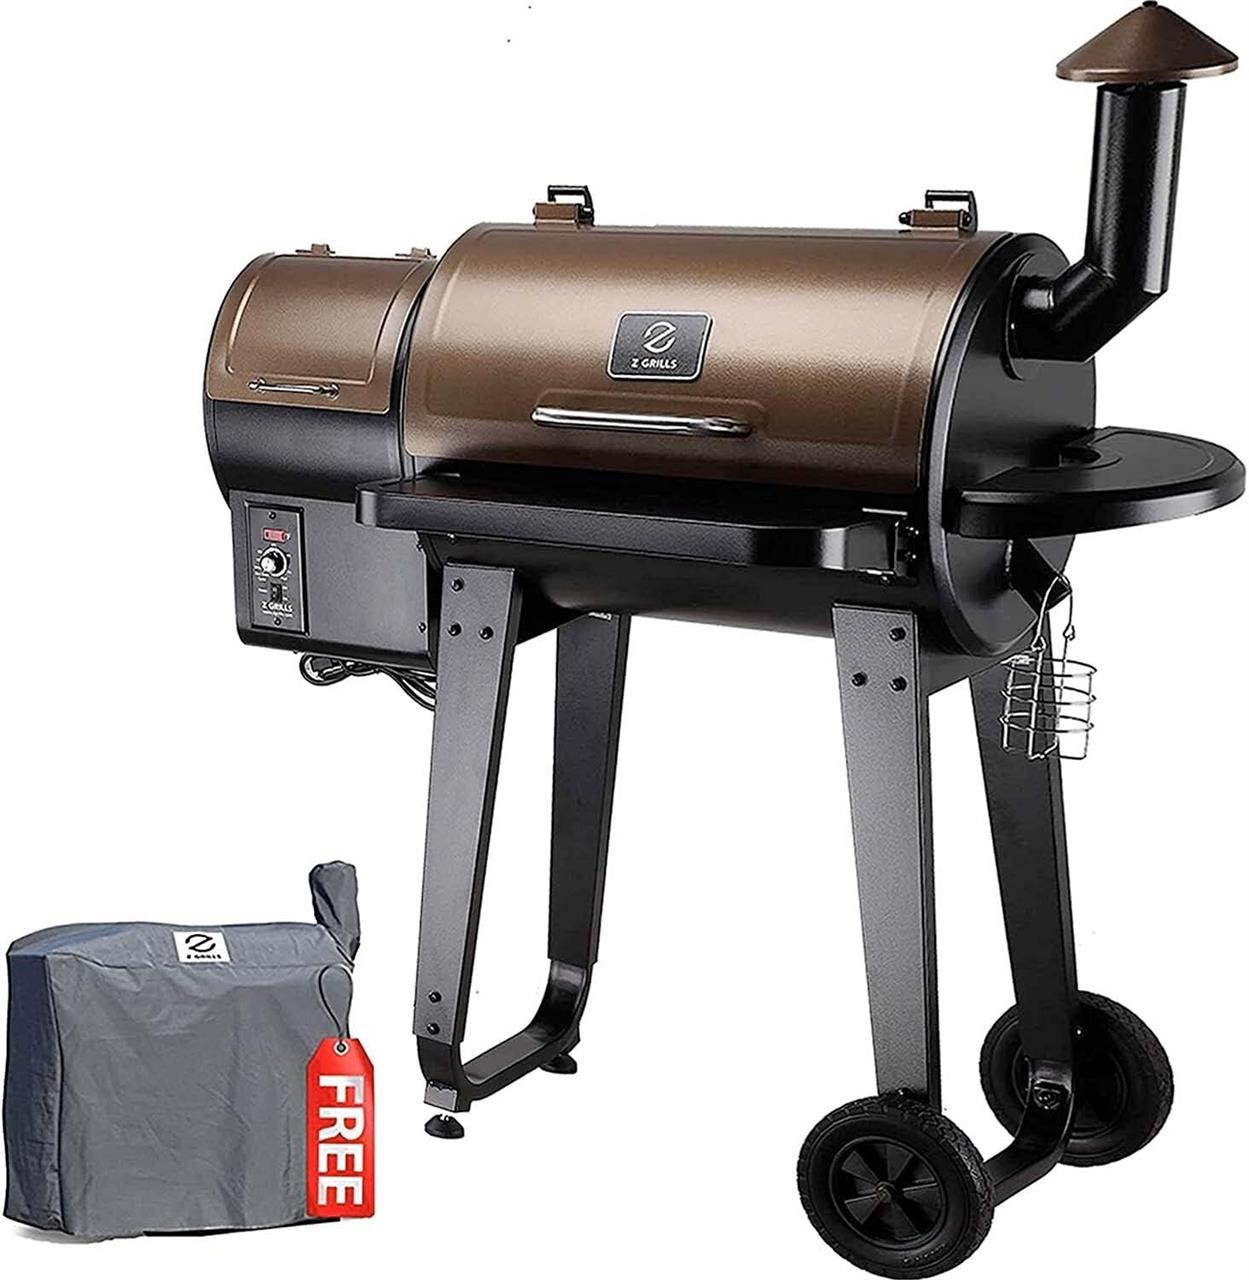 Z GRILLS ZPG-450A Grill & Smoker 450 Sq in